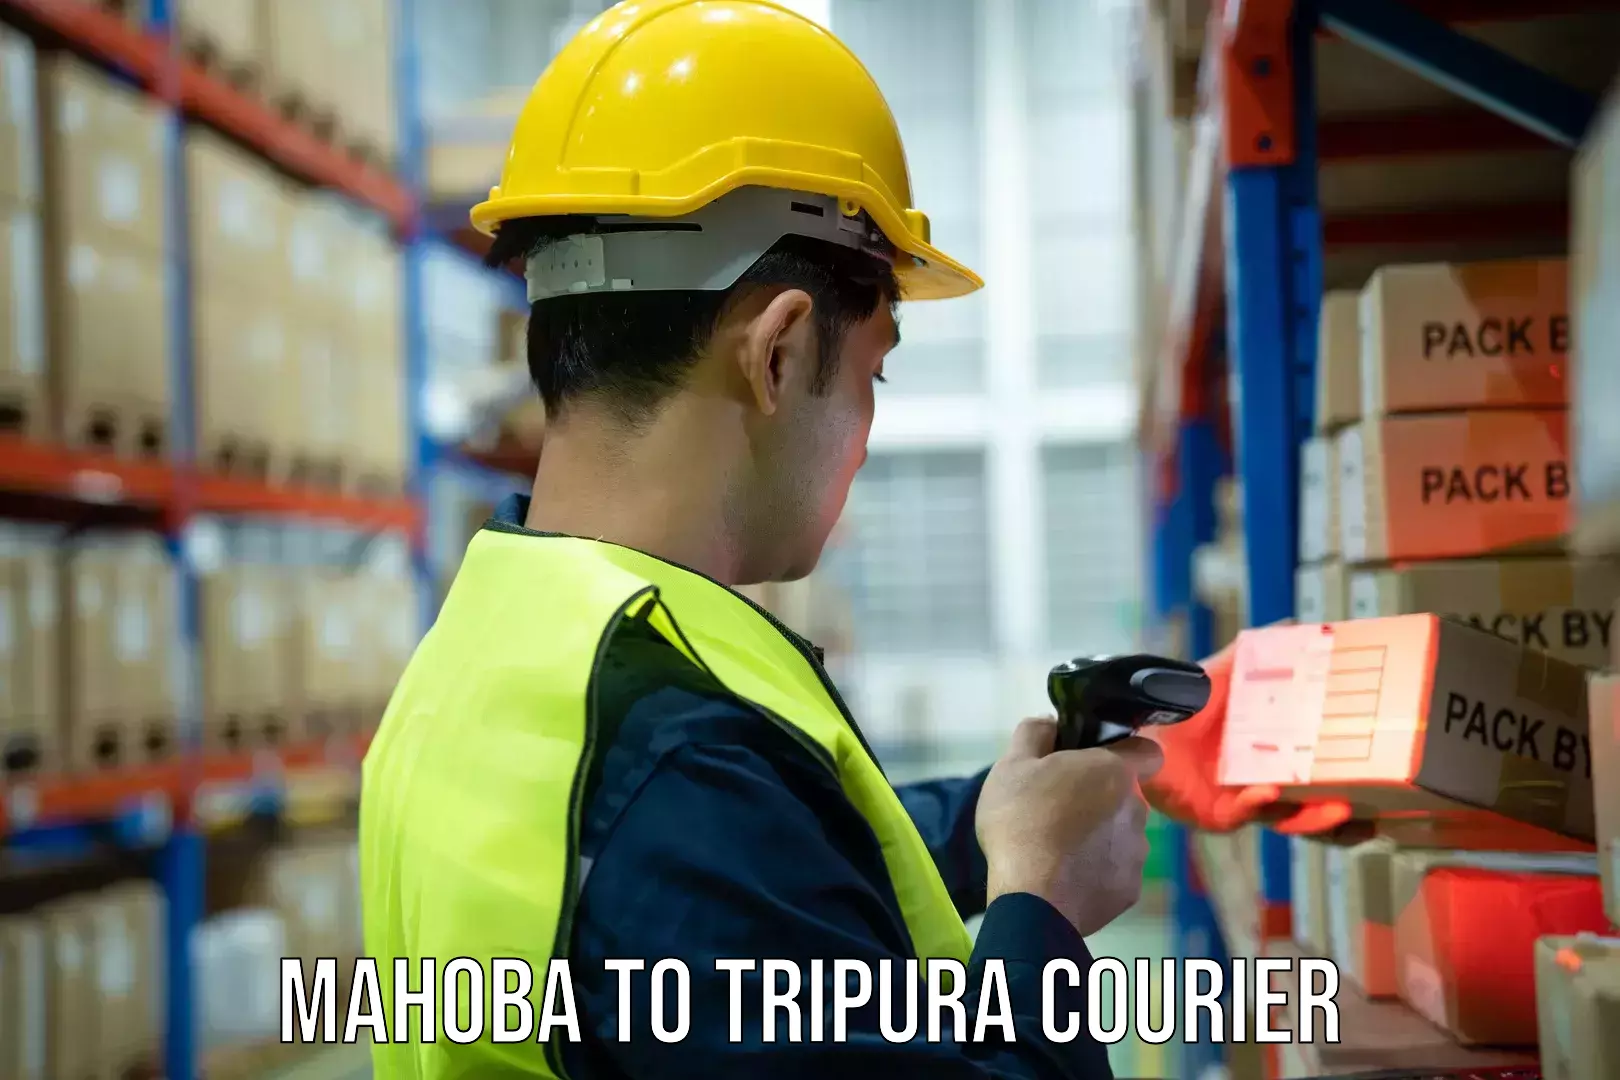 Ocean freight courier Mahoba to Udaipur Tripura